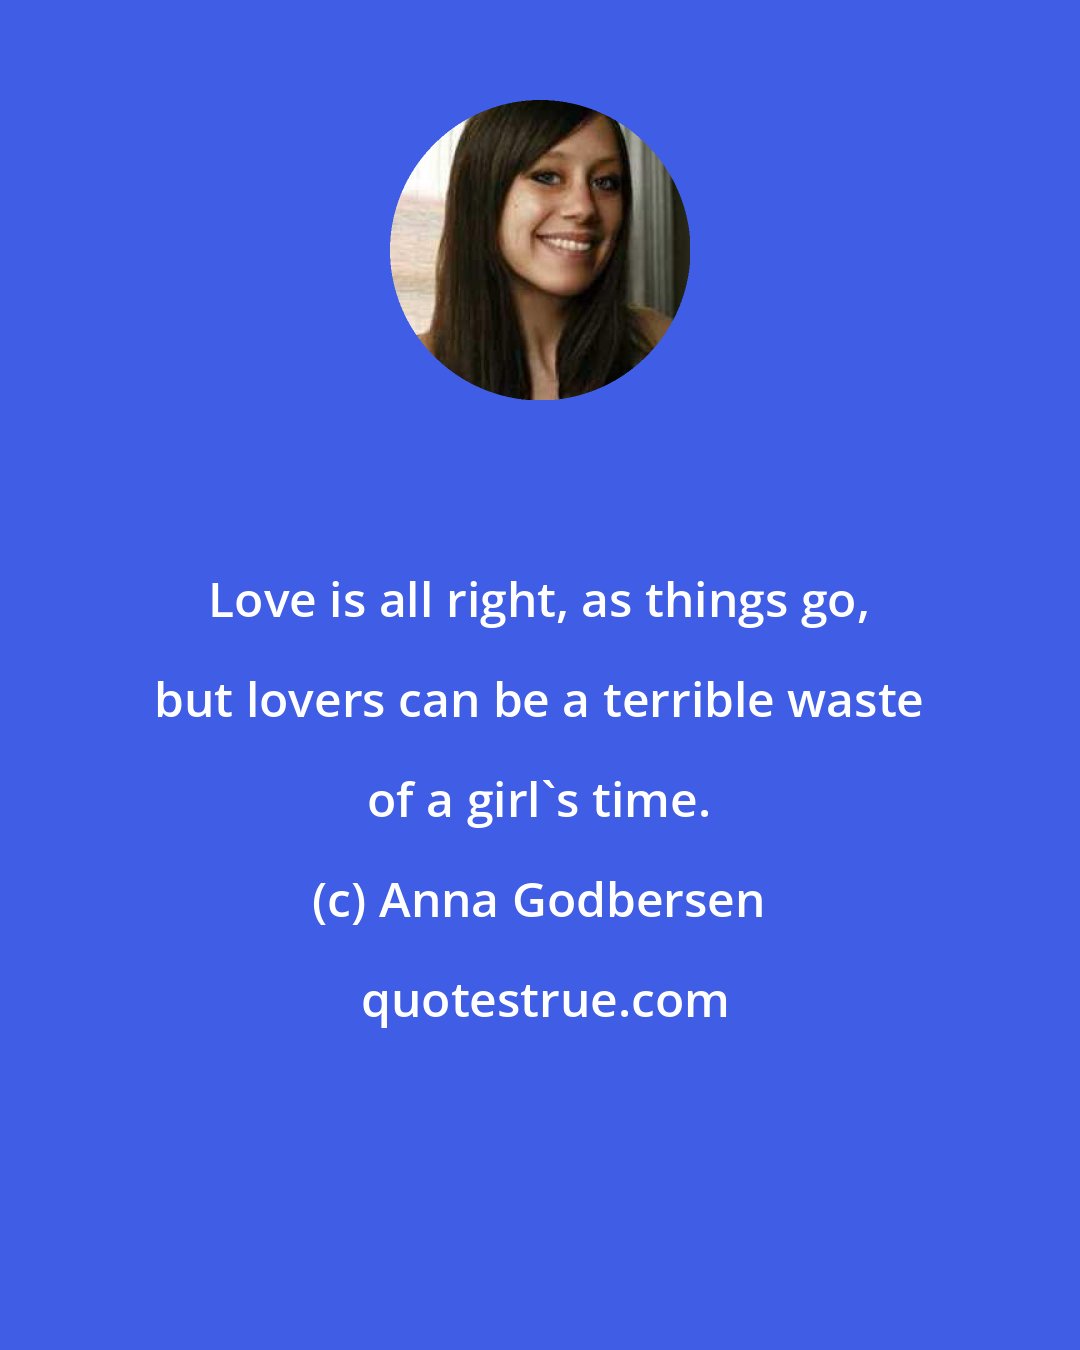 Anna Godbersen: Love is all right, as things go, but lovers can be a terrible waste of a girl's time.